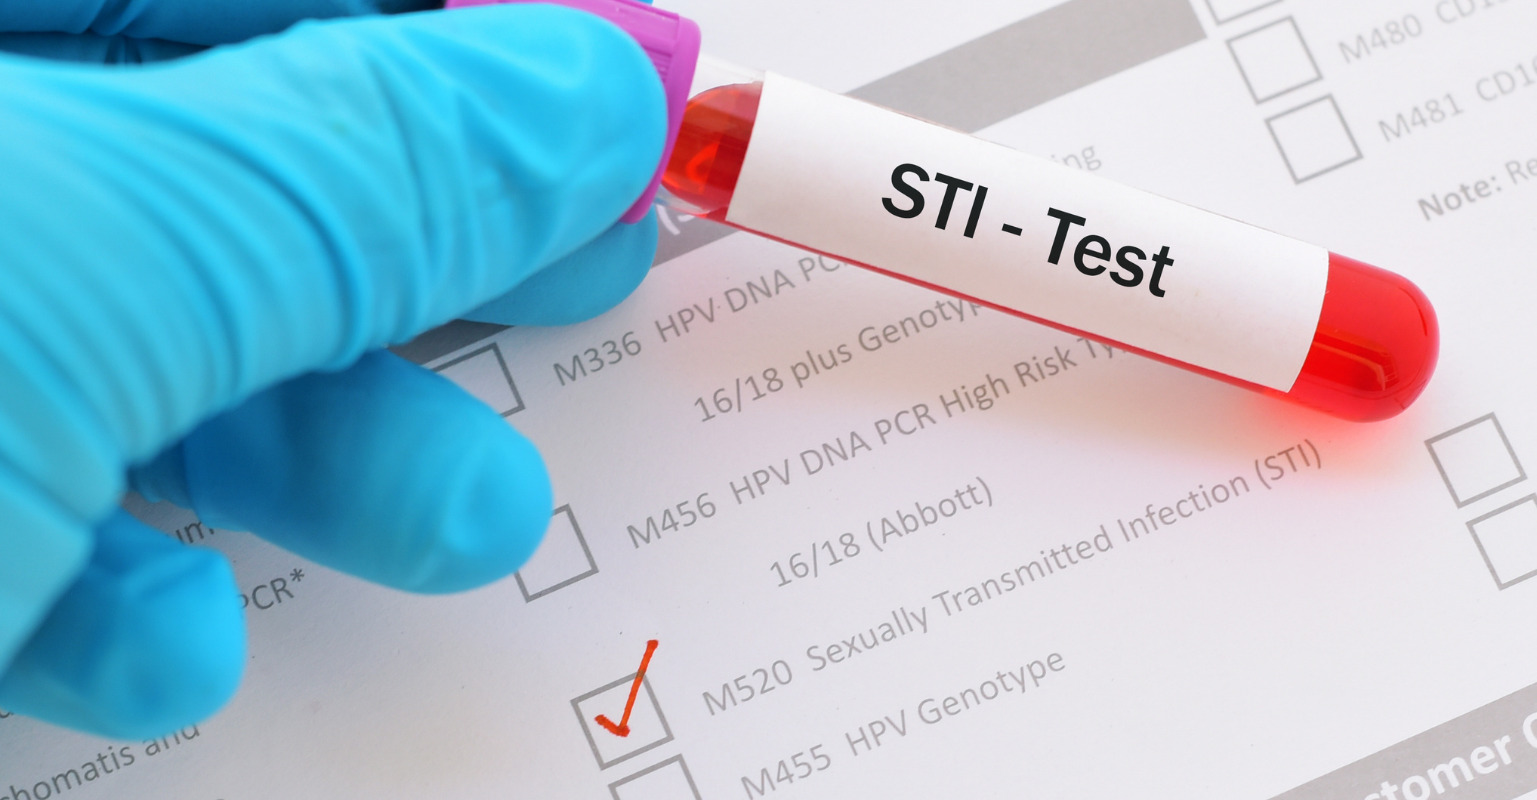 Why get tested for STIs